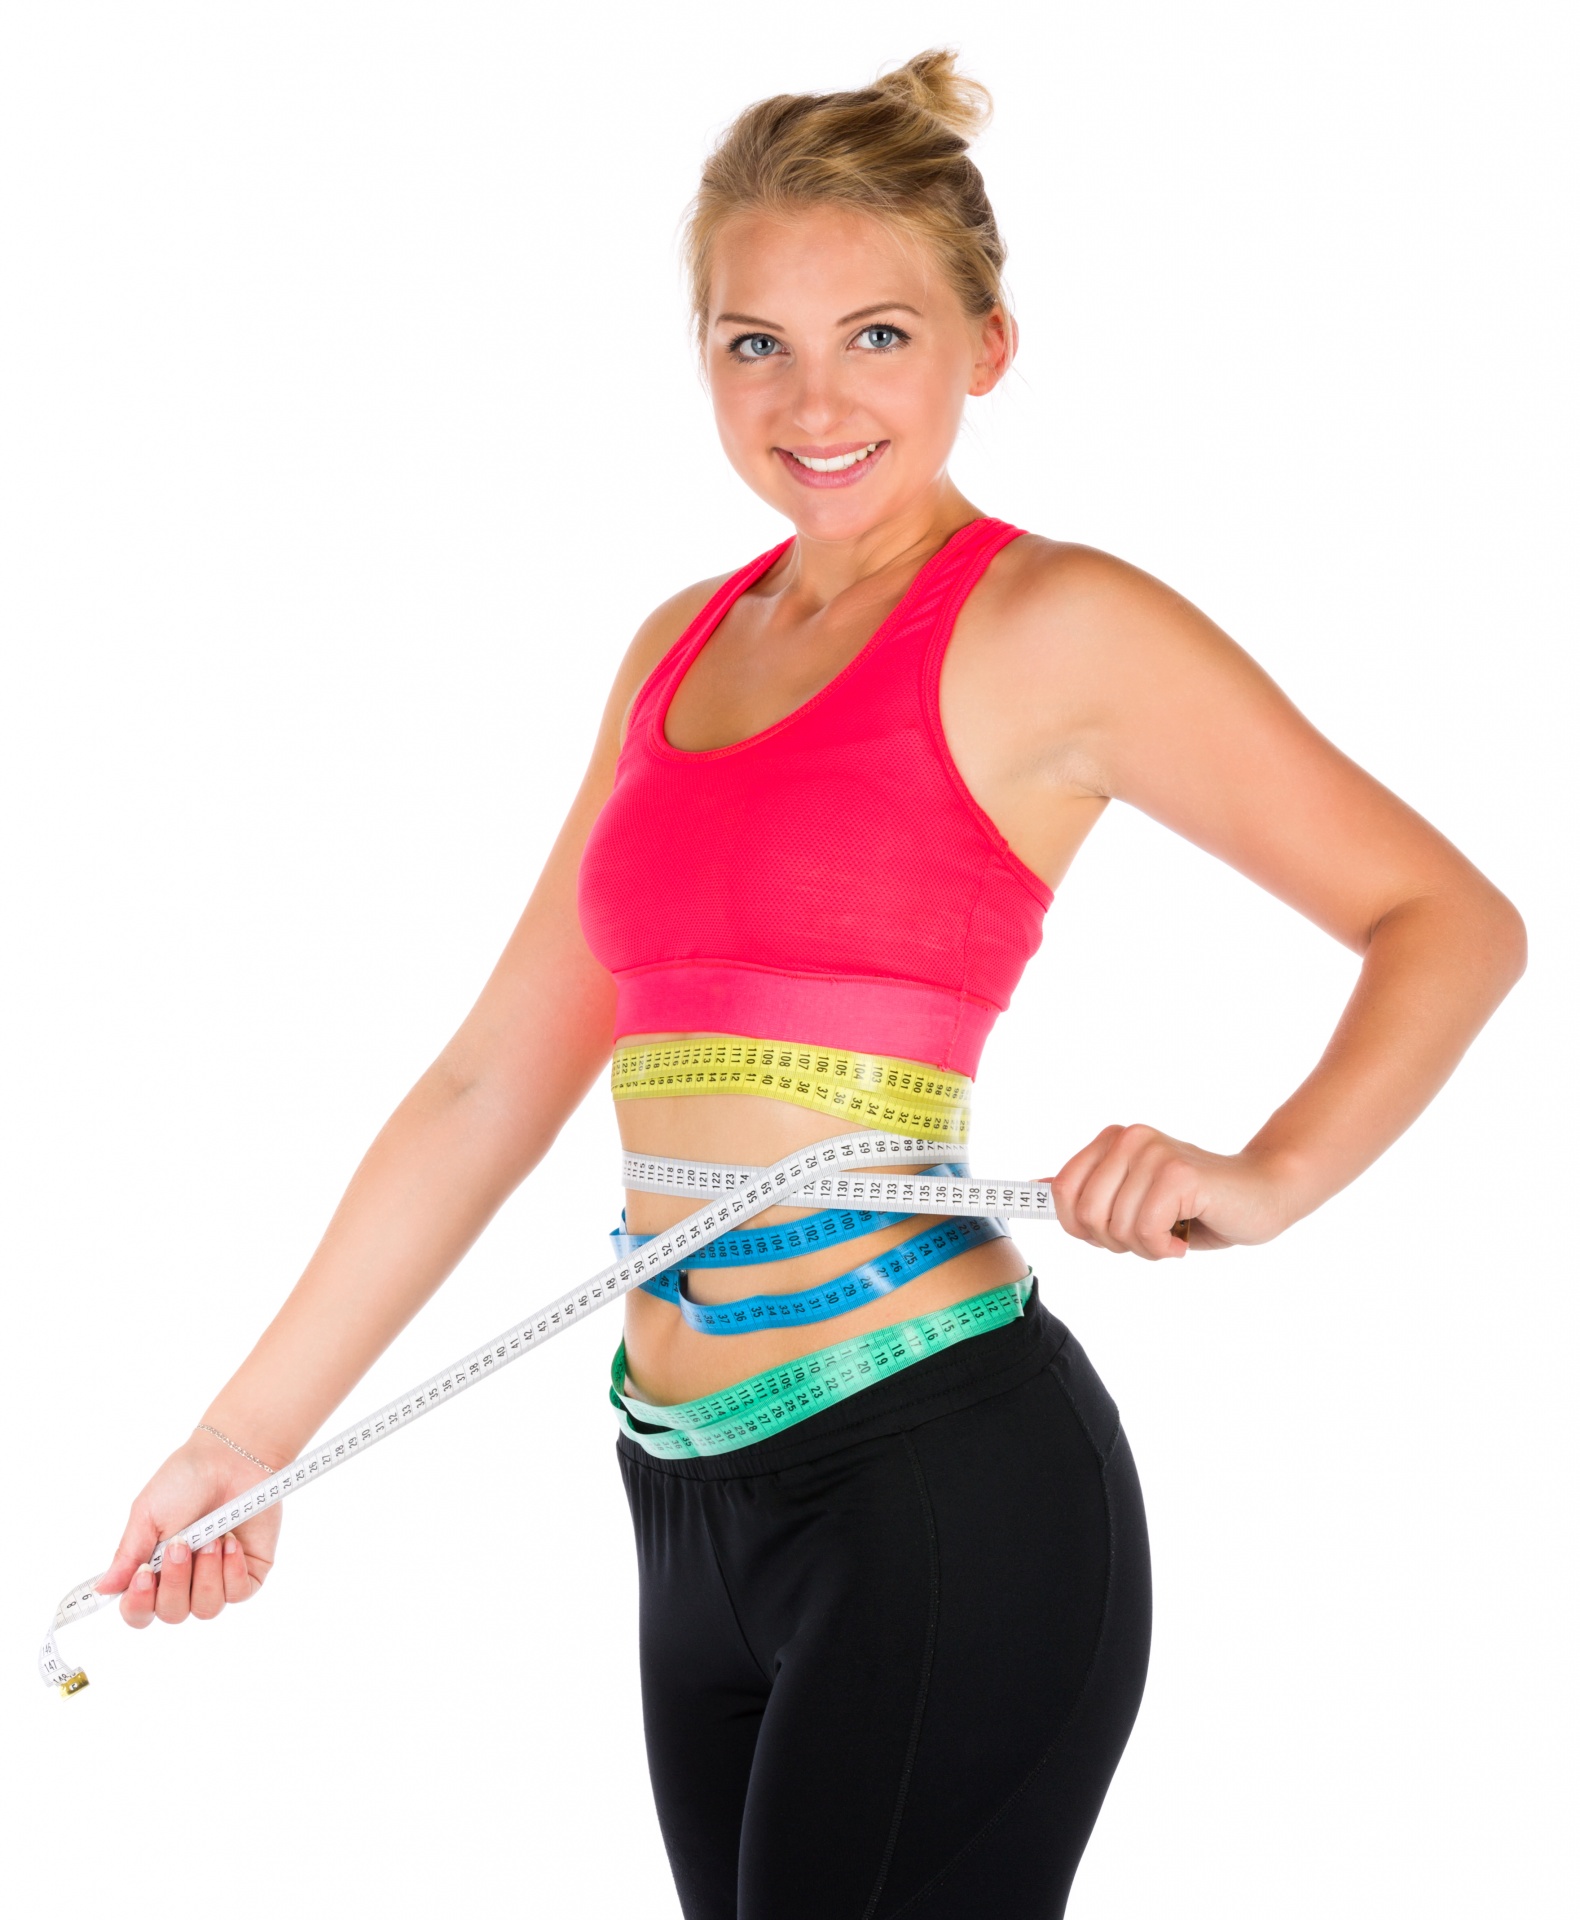 Fit Woman With A Tape